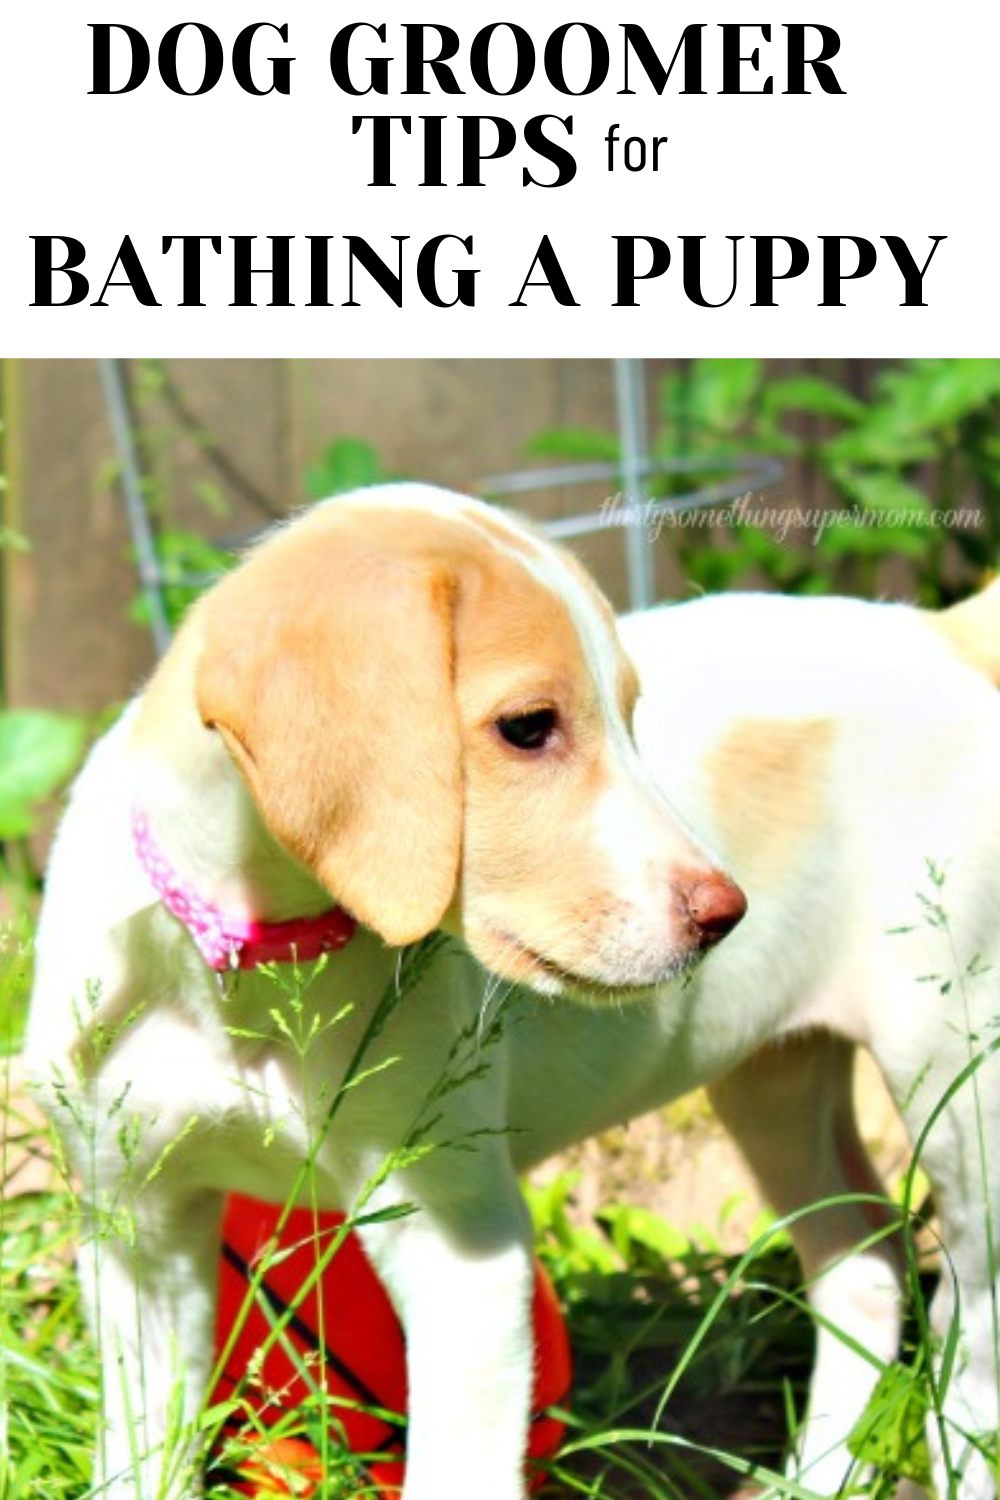 Dog groomer tips for bathing a puppy infographic. 